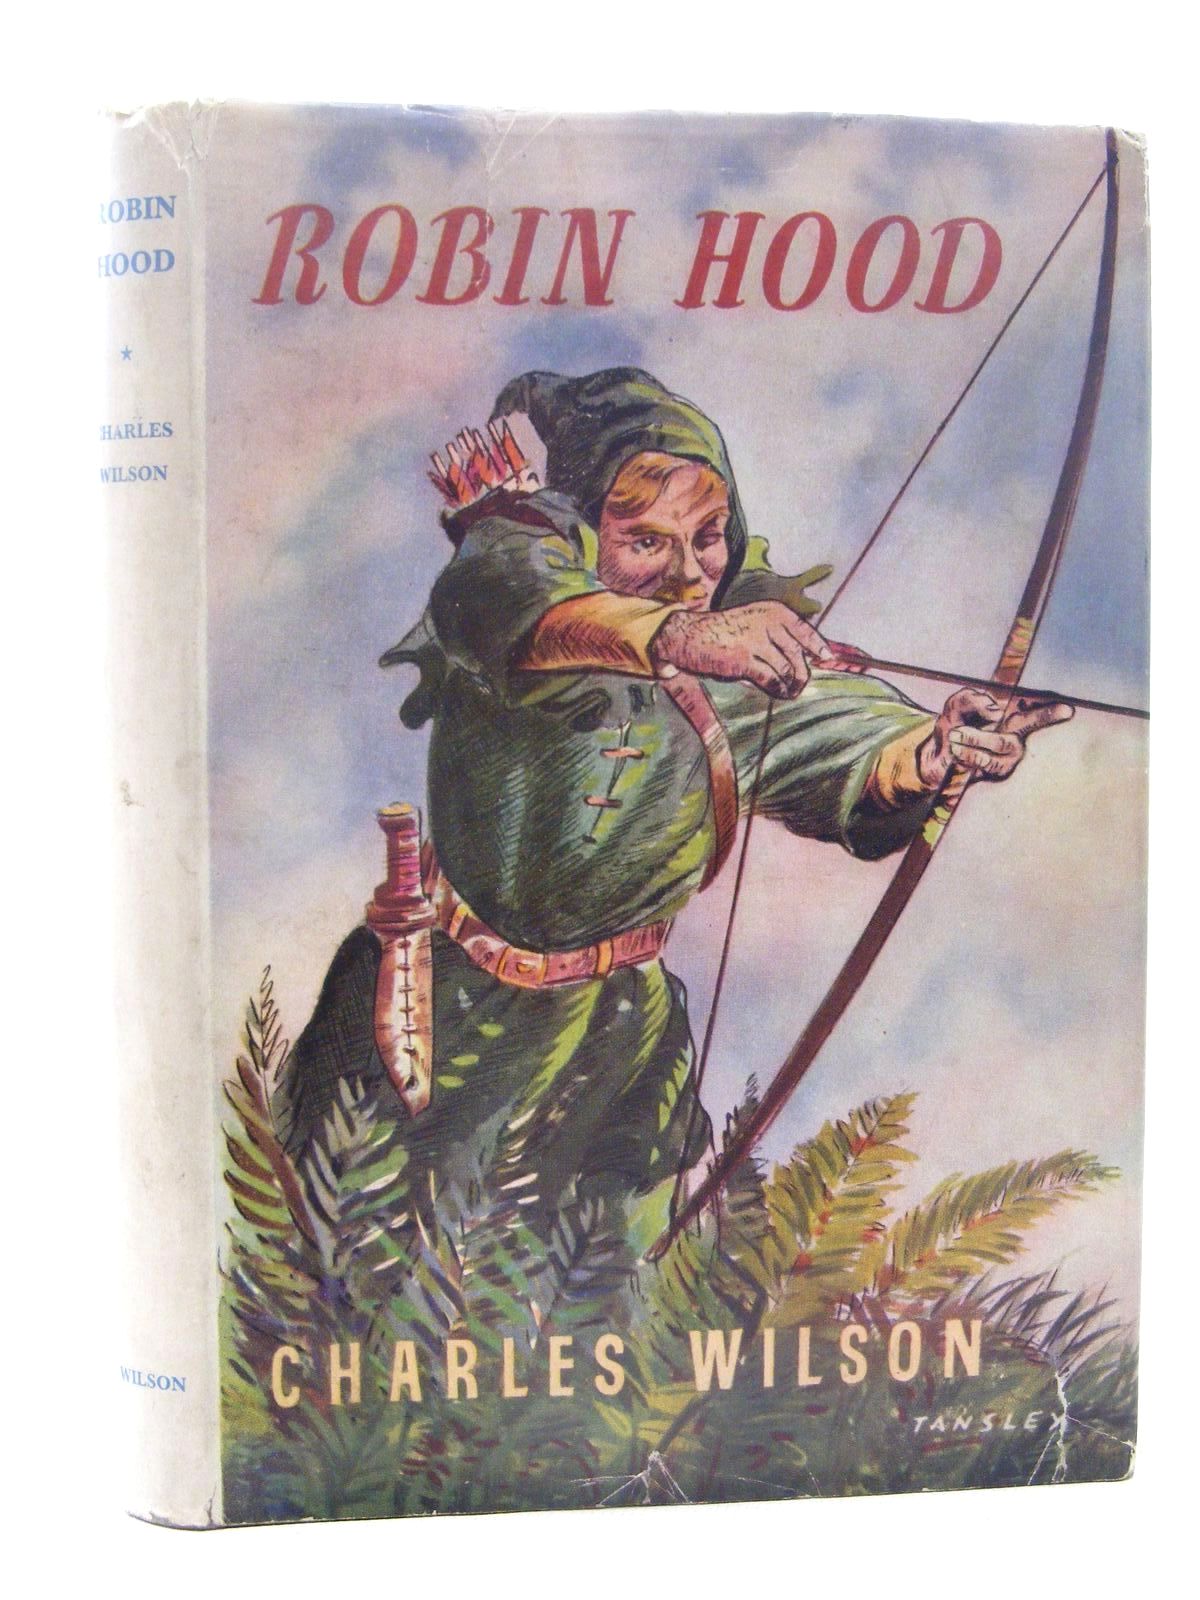 Photo of ROBIN HOOD HIS MERRY EXPLOITS written by Wilson, Charles published by Charles Wilson (booksellers) Limited (STOCK CODE: 1815952)  for sale by Stella & Rose's Books